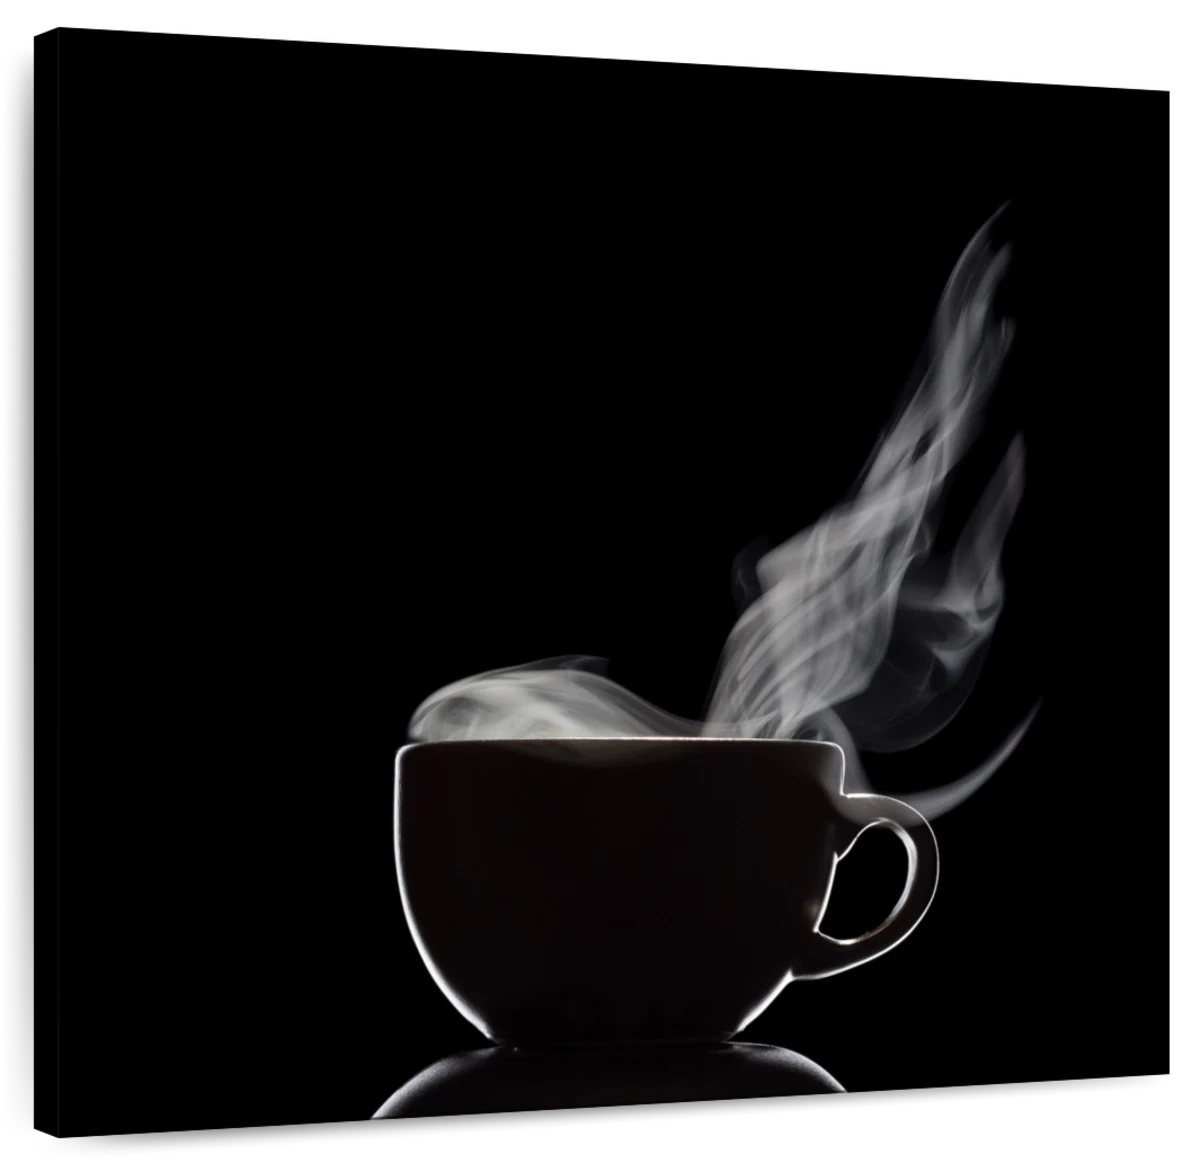 coffee cup silhouette transparent